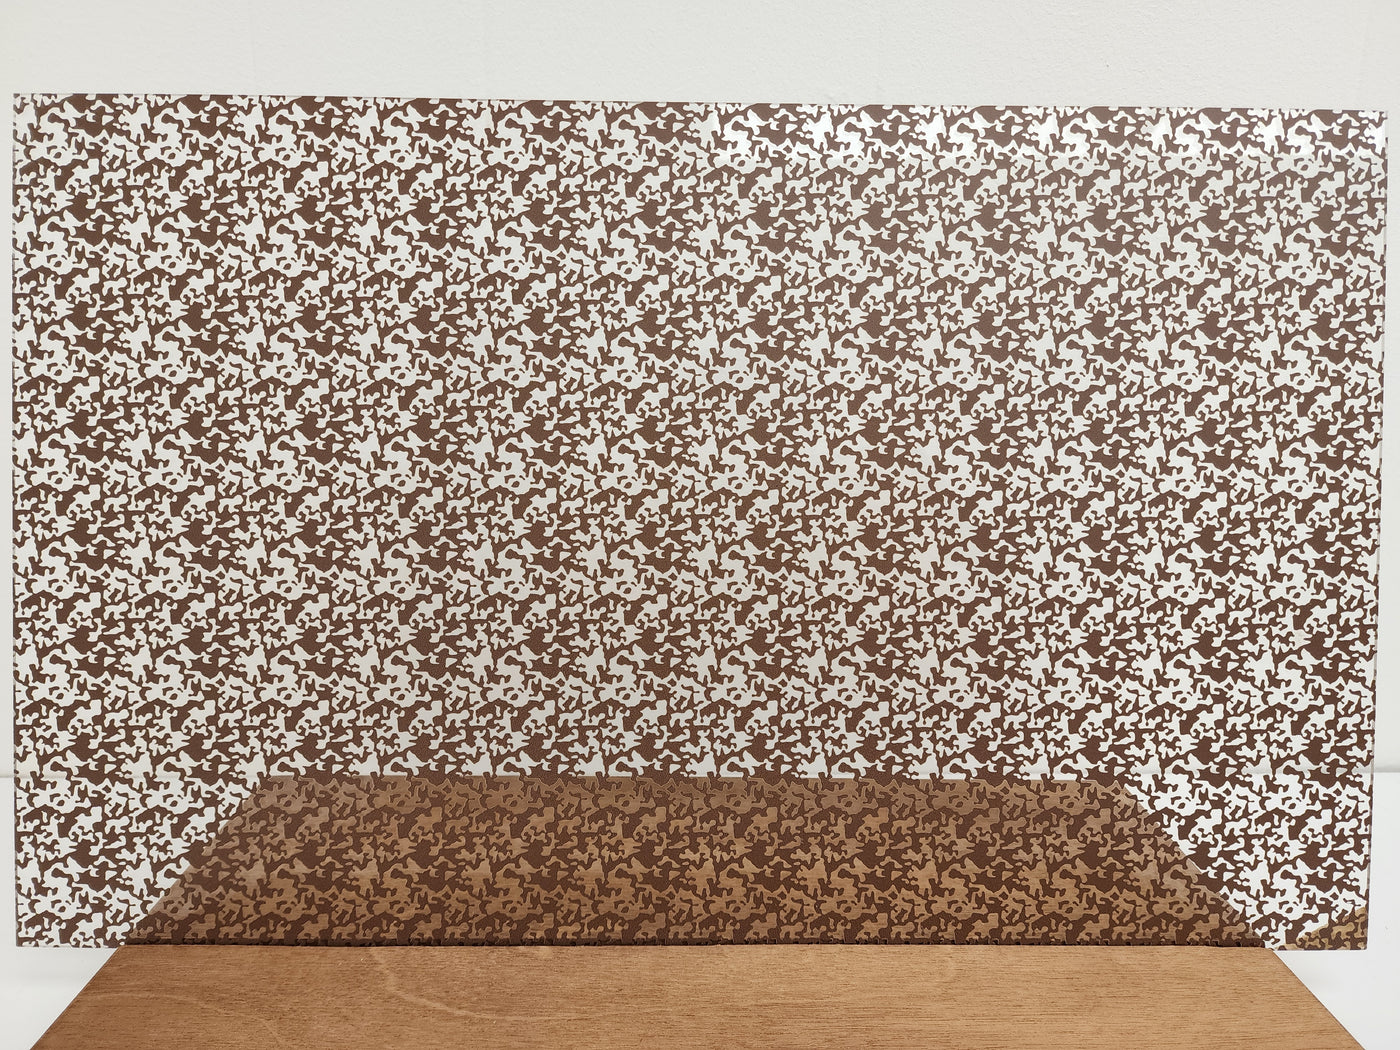 PatternPly® Scattered Camouflage BROWN